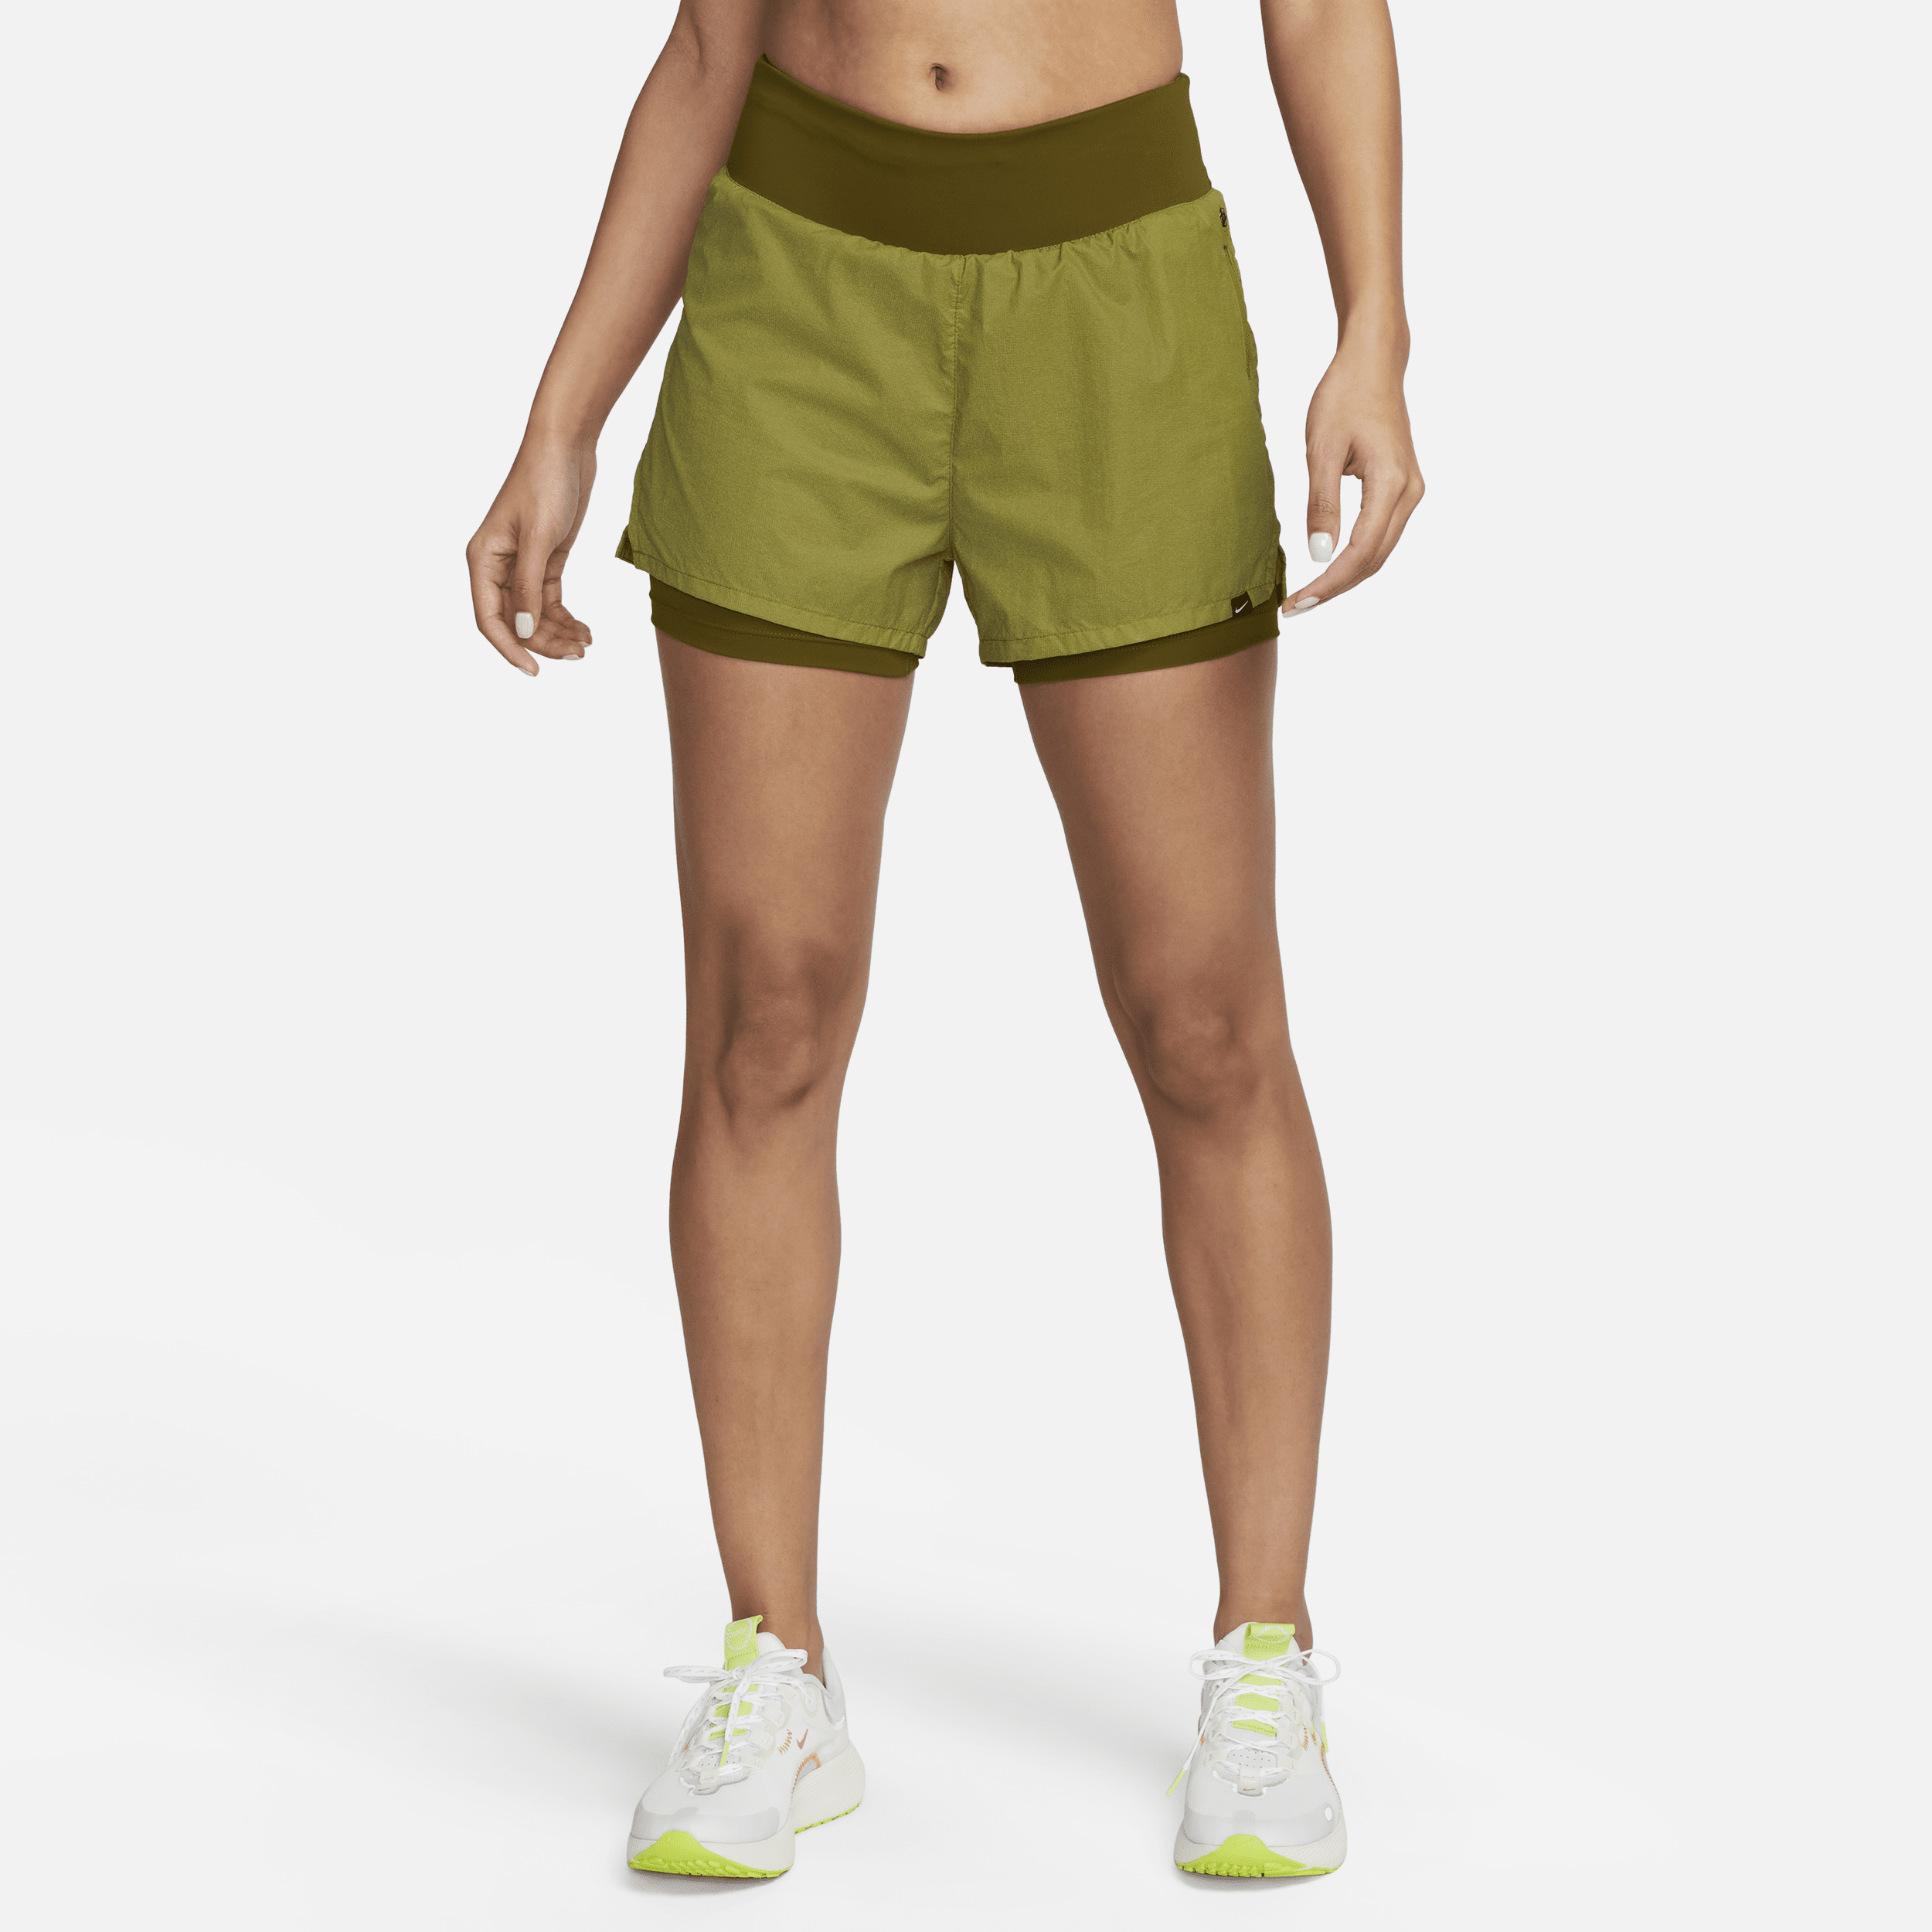 NIKE WOMEN'S RUN DIVISION MID-RISE 3" 2-IN-1 REFLECTIVE SHORTS,1009786498